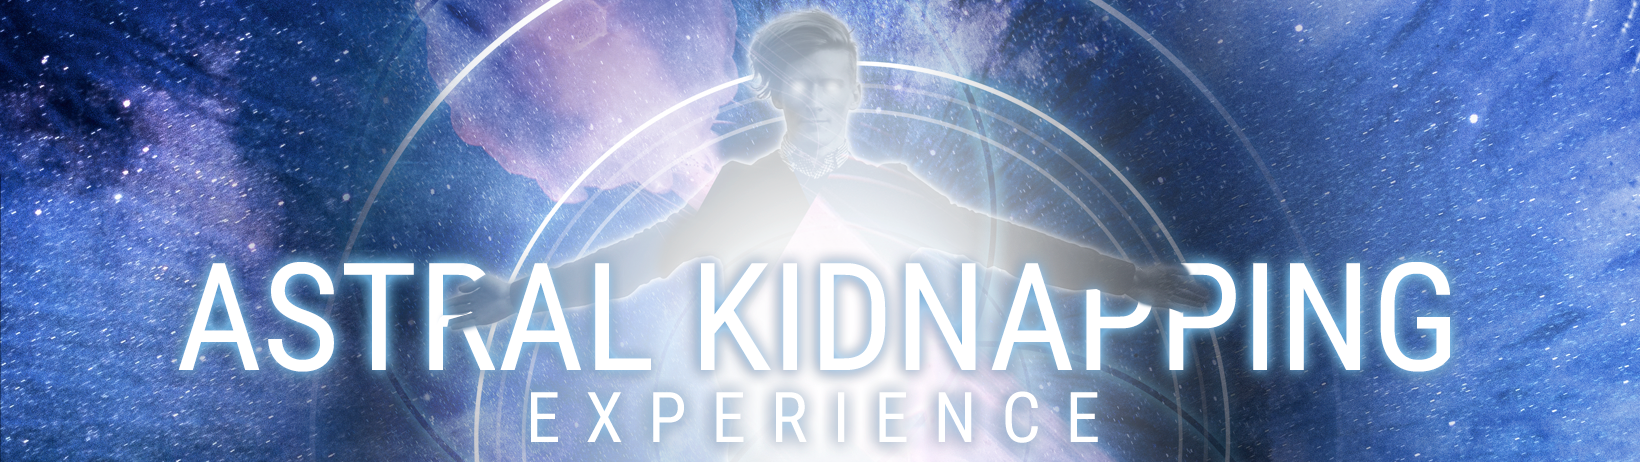 Astral kidnapping experience